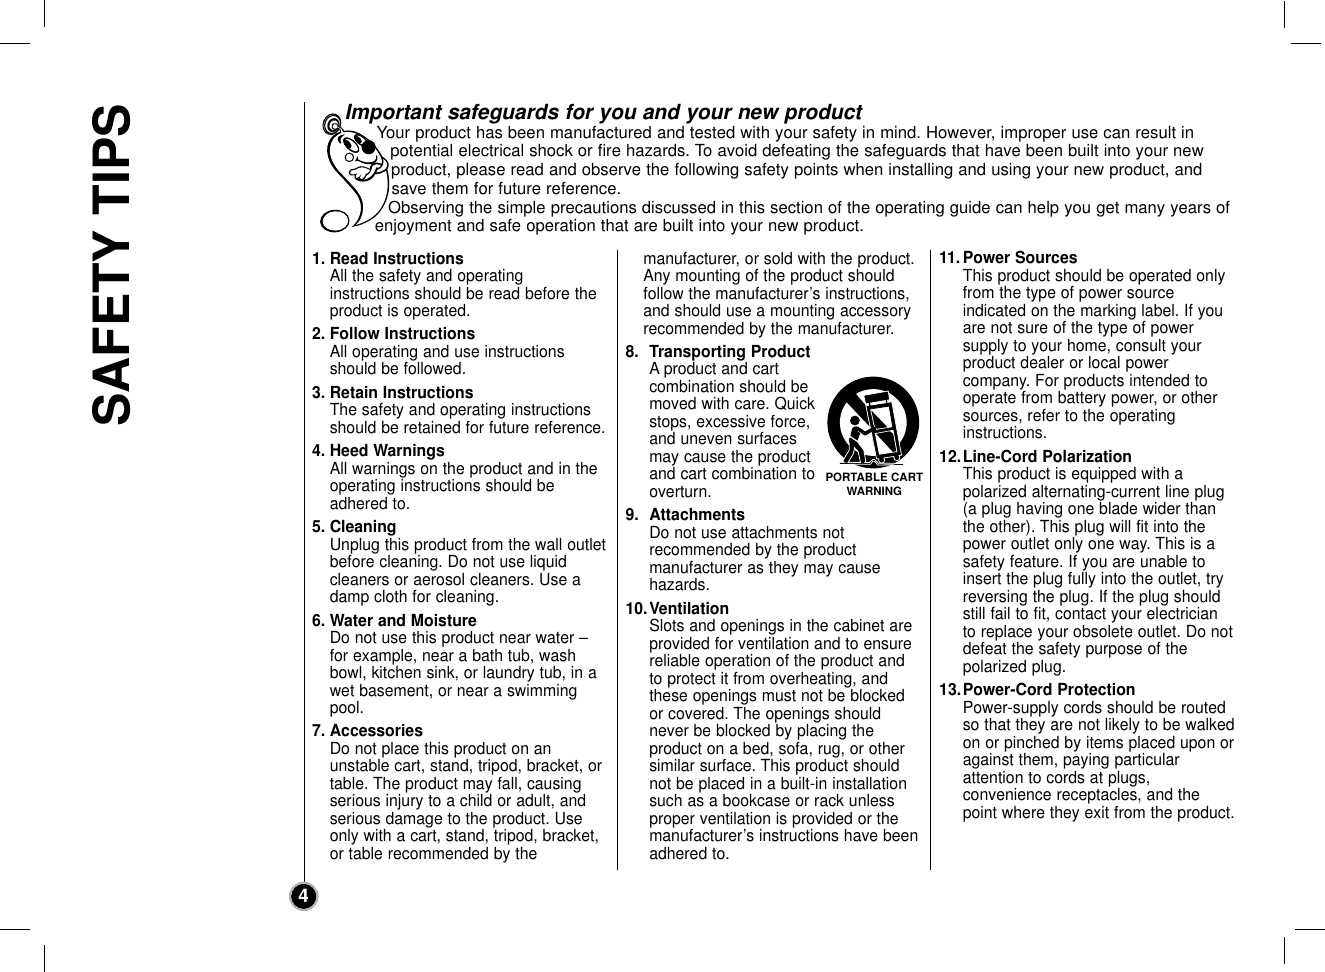 SAFETY TIPS41. Read InstructionsAll the safety and operating instructions should be read before theproduct is operated. 2. Follow InstructionsAll operating and use instructionsshould be followed.3. Retain InstructionsThe safety and operating instructionsshould be retained for future reference.4. Heed WarningsAll warnings on the product and in theoperating instructions should beadhered to.5. CleaningUnplug this product from the wall outletbefore cleaning. Do not use liquidcleaners or aerosol cleaners. Use adamp cloth for cleaning.6. Water and MoistureDo not use this product near water –for example, near a bath tub, washbowl, kitchen sink, or laundry tub, in awet basement, or near a swimmingpool.7. AccessoriesDo not place this product on an unstable cart, stand, tripod, bracket, ortable. The product may fall, causingserious injury to a child or adult, andserious damage to the product. Useonly with a cart, stand, tripod, bracket,or table recommended by the manufacturer, or sold with the product.Any mounting of the product should follow the manufacturer’s instructions,and should use a mounting accessory recommended by the manufacturer.8. Transporting ProductA product and cartcombination should bemoved with care. Quickstops, excessive force,and uneven surfacesmay cause the productand cart combination tooverturn.9. AttachmentsDo not use attachments not recommended by the product manufacturer as they may cause hazards.10.VentilationSlots and openings in the cabinet areprovided for ventilation and to ensurereliable operation of the product andto protect it from overheating, andthese openings must not be blockedor covered. The openings shouldnever be blocked by placing the product on a bed, sofa, rug, or othersimilar surface. This product shouldnot be placed in a built-in installationsuch as a bookcase or rack unlessproper ventilation is provided or themanufacturer’s instructions have beenadhered to.11.Power SourcesThis product should be operated onlyfrom the type of power source indicated on the marking label. If youare not sure of the type of power supply to your home, consult yourproduct dealer or local power company. For products intended tooperate from battery power, or othersources, refer to the operating instructions.12.Line-Cord PolarizationThis product is equipped with a polarized alternating-current line plug(a plug having one blade wider thanthe other). This plug will fit into thepower outlet only one way. This is asafety feature. If you are unable toinsert the plug fully into the outlet, tryreversing the plug. If the plug shouldstill fail to fit, contact your electricianto replace your obsolete outlet. Do notdefeat the safety purpose of the polarized plug.13.Power-Cord ProtectionPower-supply cords should be routedso that they are not likely to be walkedon or pinched by items placed upon oragainst them, paying particular attention to cords at plugs, convenience receptacles, and thepoint where they exit from the product.Important safeguards for you and your new productYour product has been manufactured and tested with your safety in mind. However, improper use can result inpotential electrical shock or fire hazards. To avoid defeating the safeguards that have been built into your newproduct, please read and observe the following safety points when installing and using your new product, andsave them for future reference.Observing the simple precautions discussed in this section of the operating guide can help you get many years ofenjoyment and safe operation that are built into your new product.PORTABLE CARTWARNING